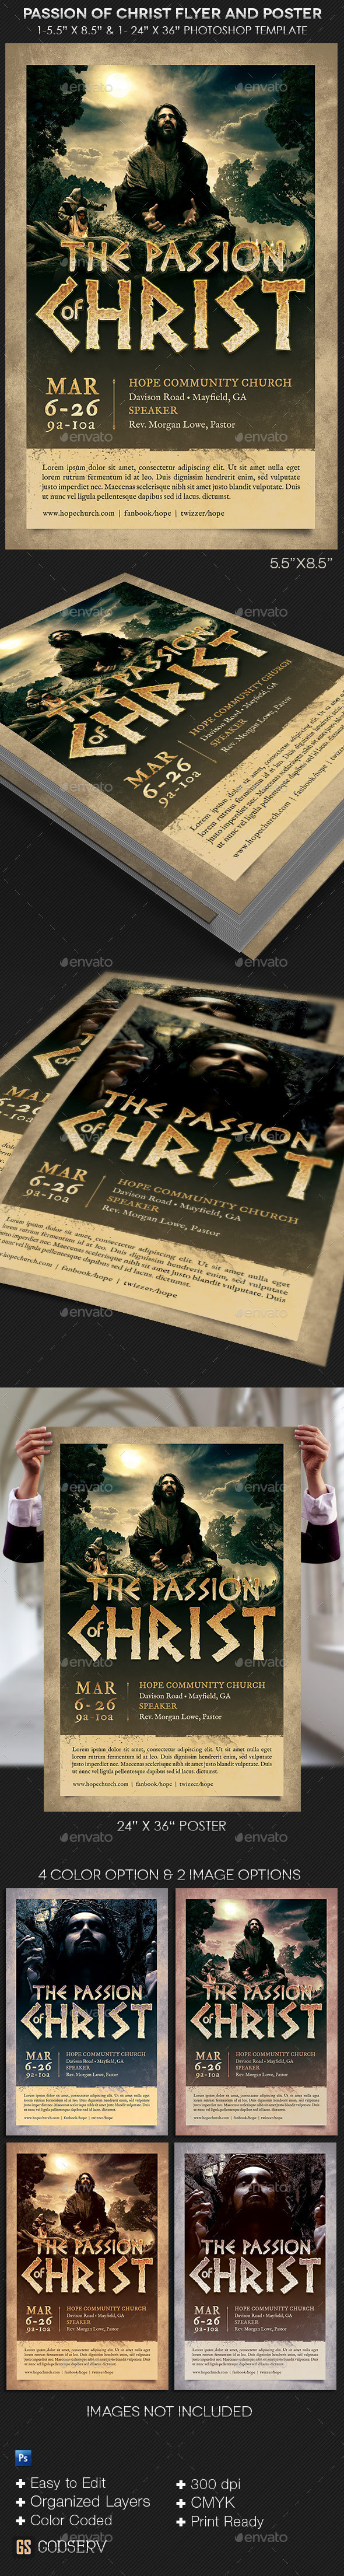 Passion of christ flyer and poster template preview